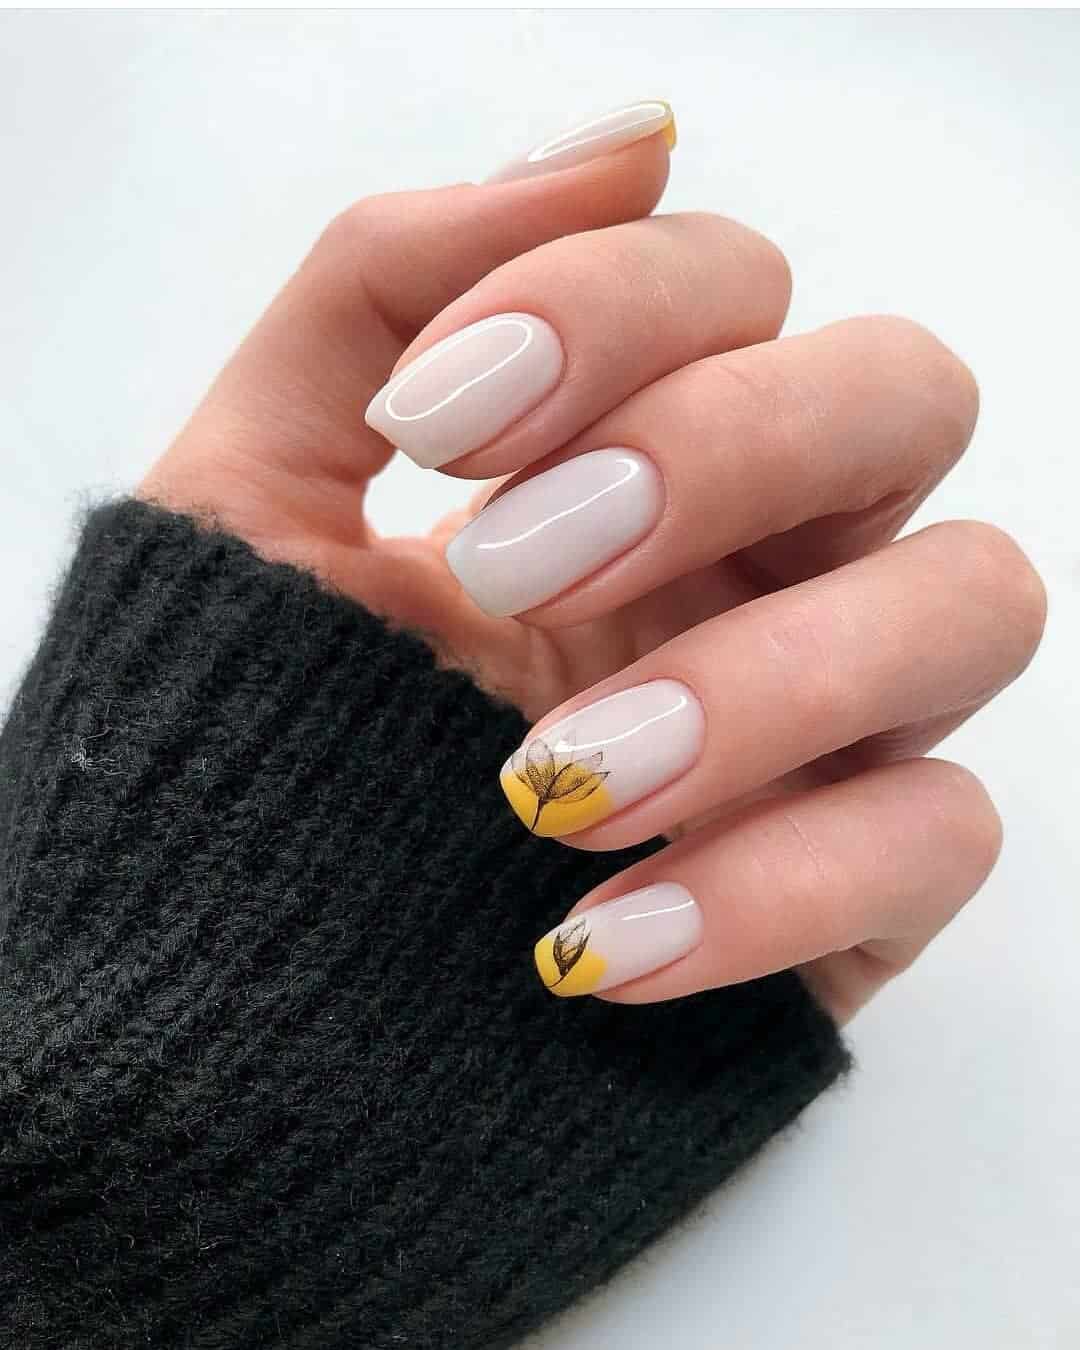 Unique and Cool Nail Art 2021 Trends and Tendencies (55 Photos+Videos)